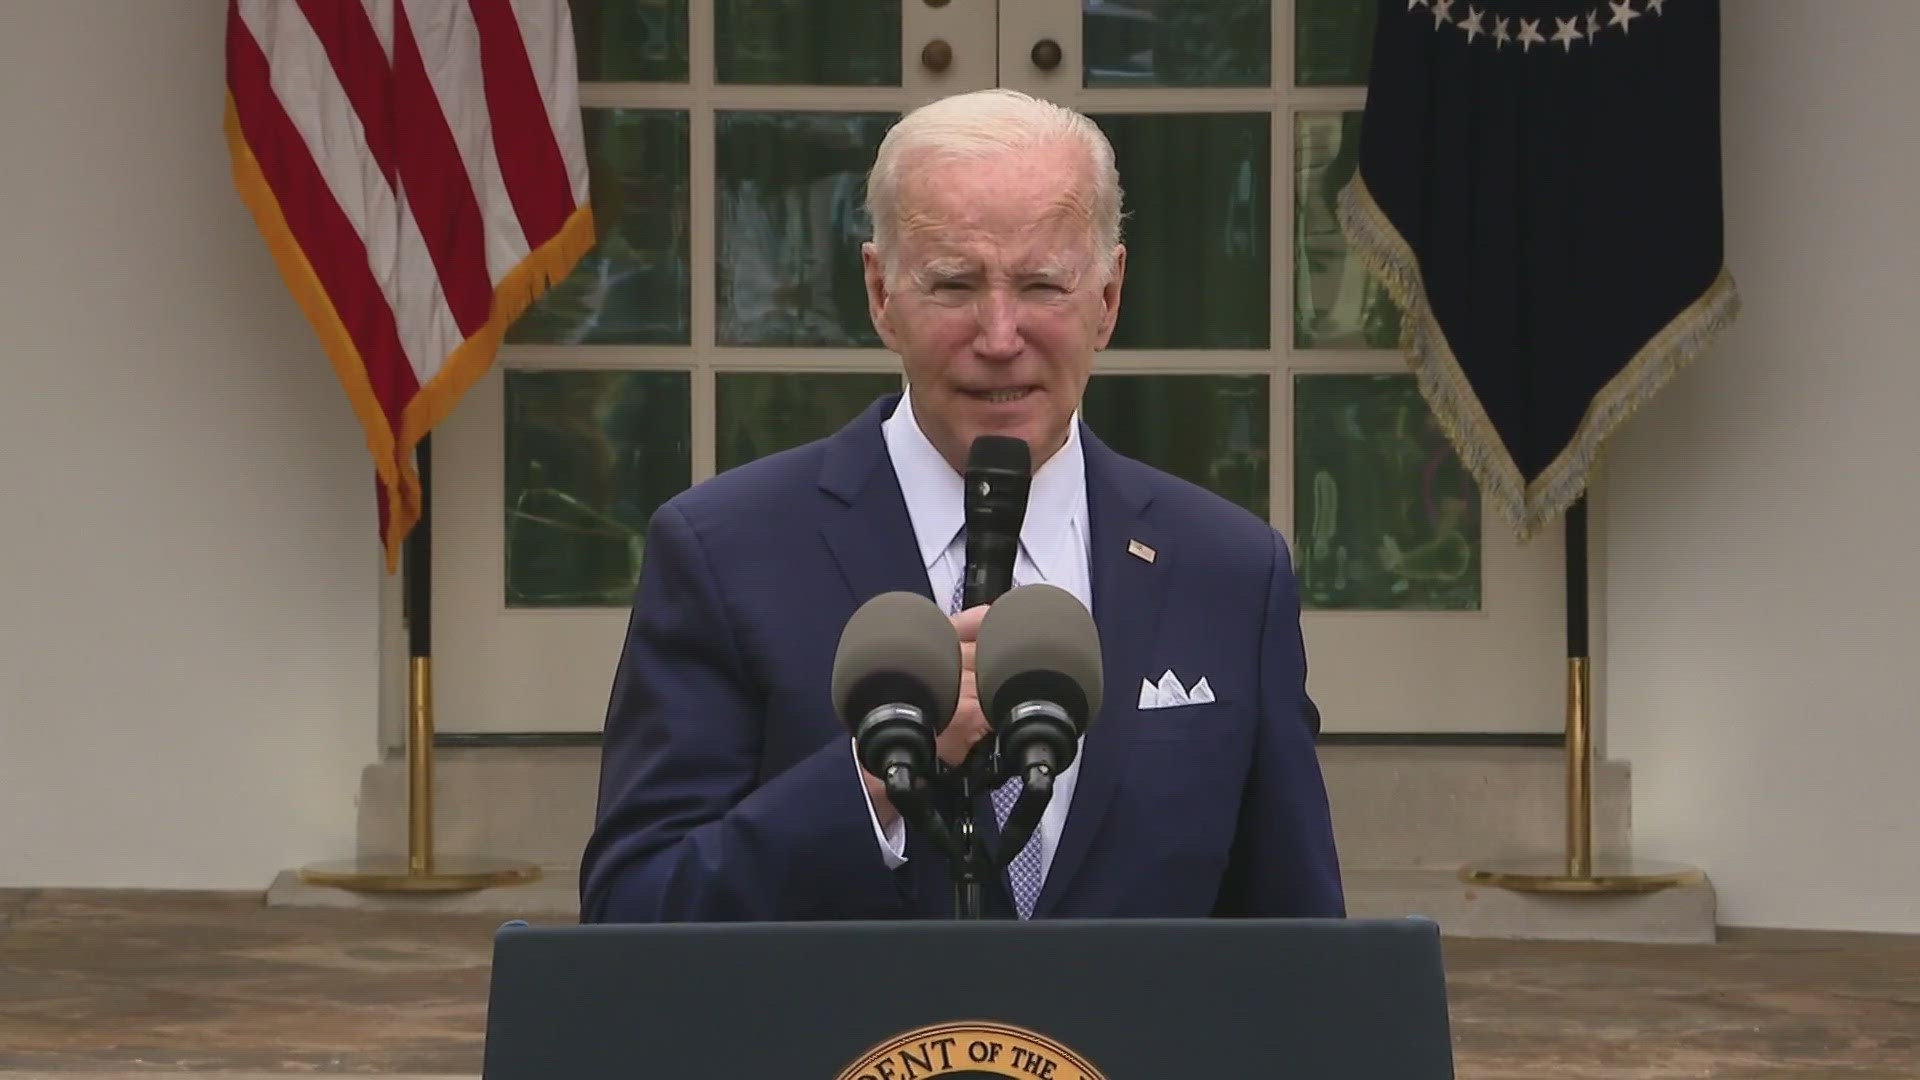 President Biden called on Congress on Monday to tighten regulations to prevent any other bank collapses.